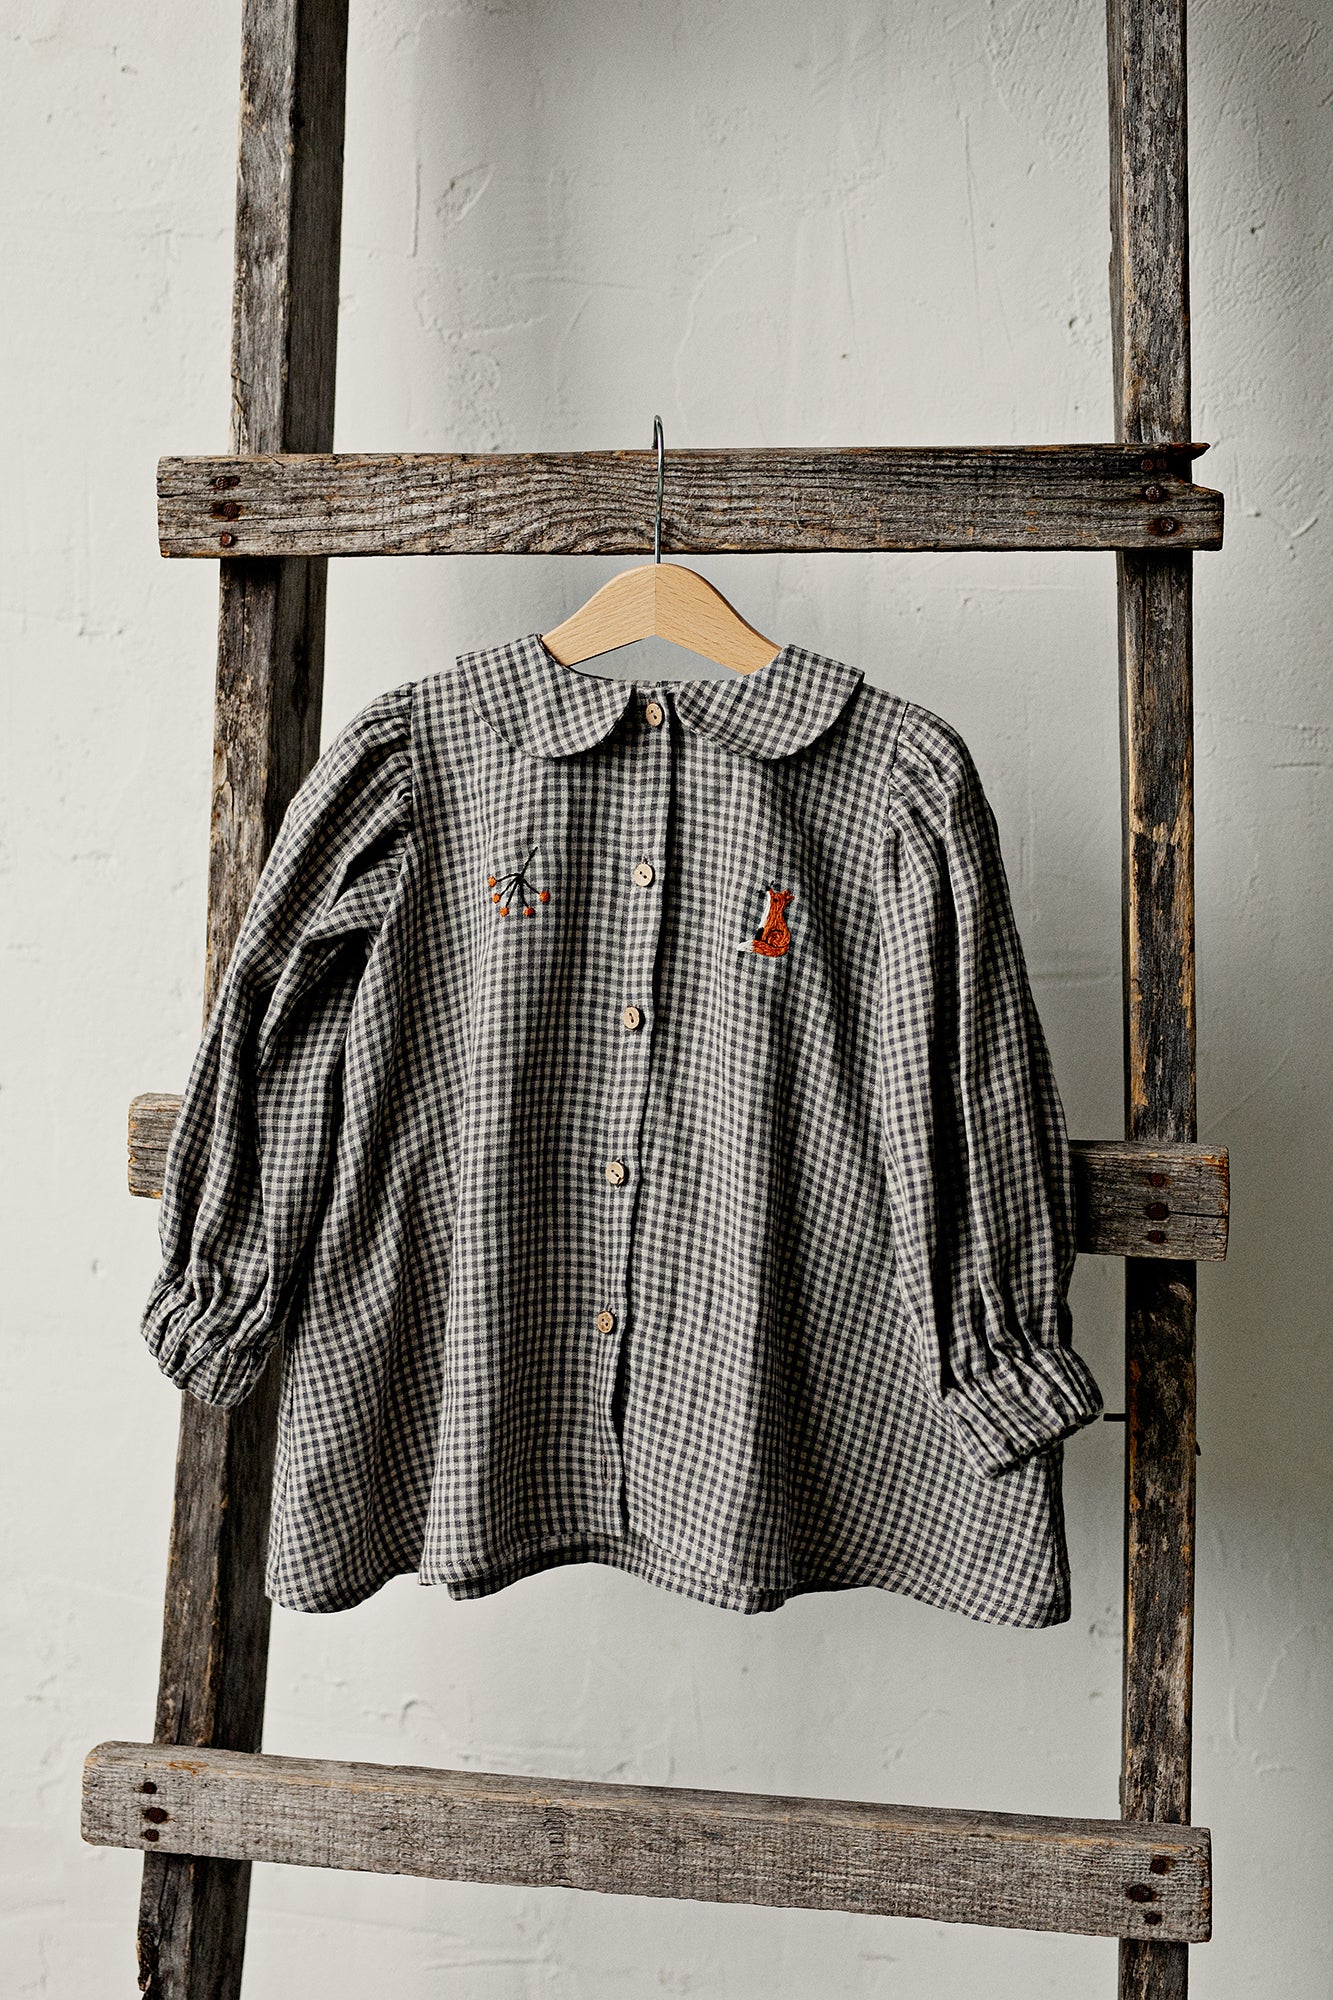 a black and white checkered shirt hanging on a wooden ladder